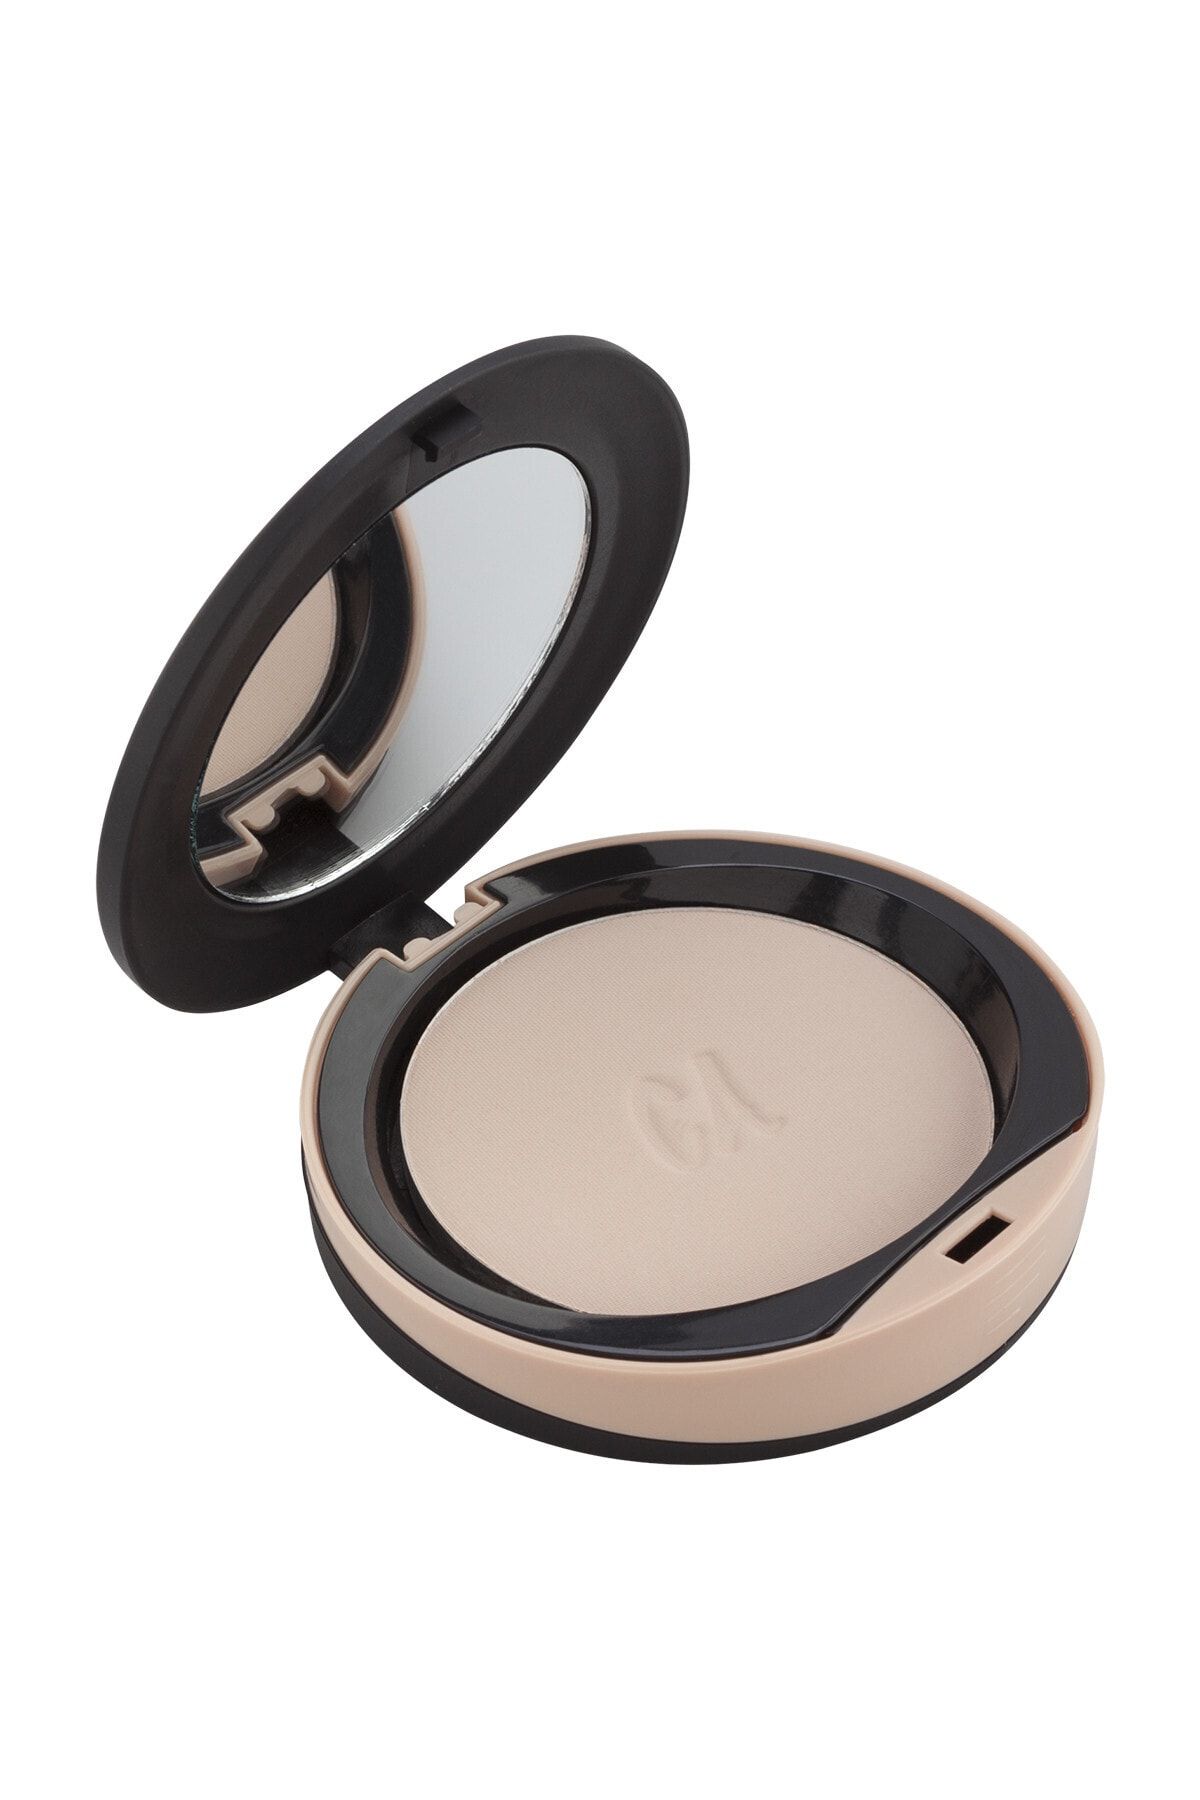 Catherine Arley Mineral Matte Compact Powder -m01- (Mineral Mat Pudra) - 2048